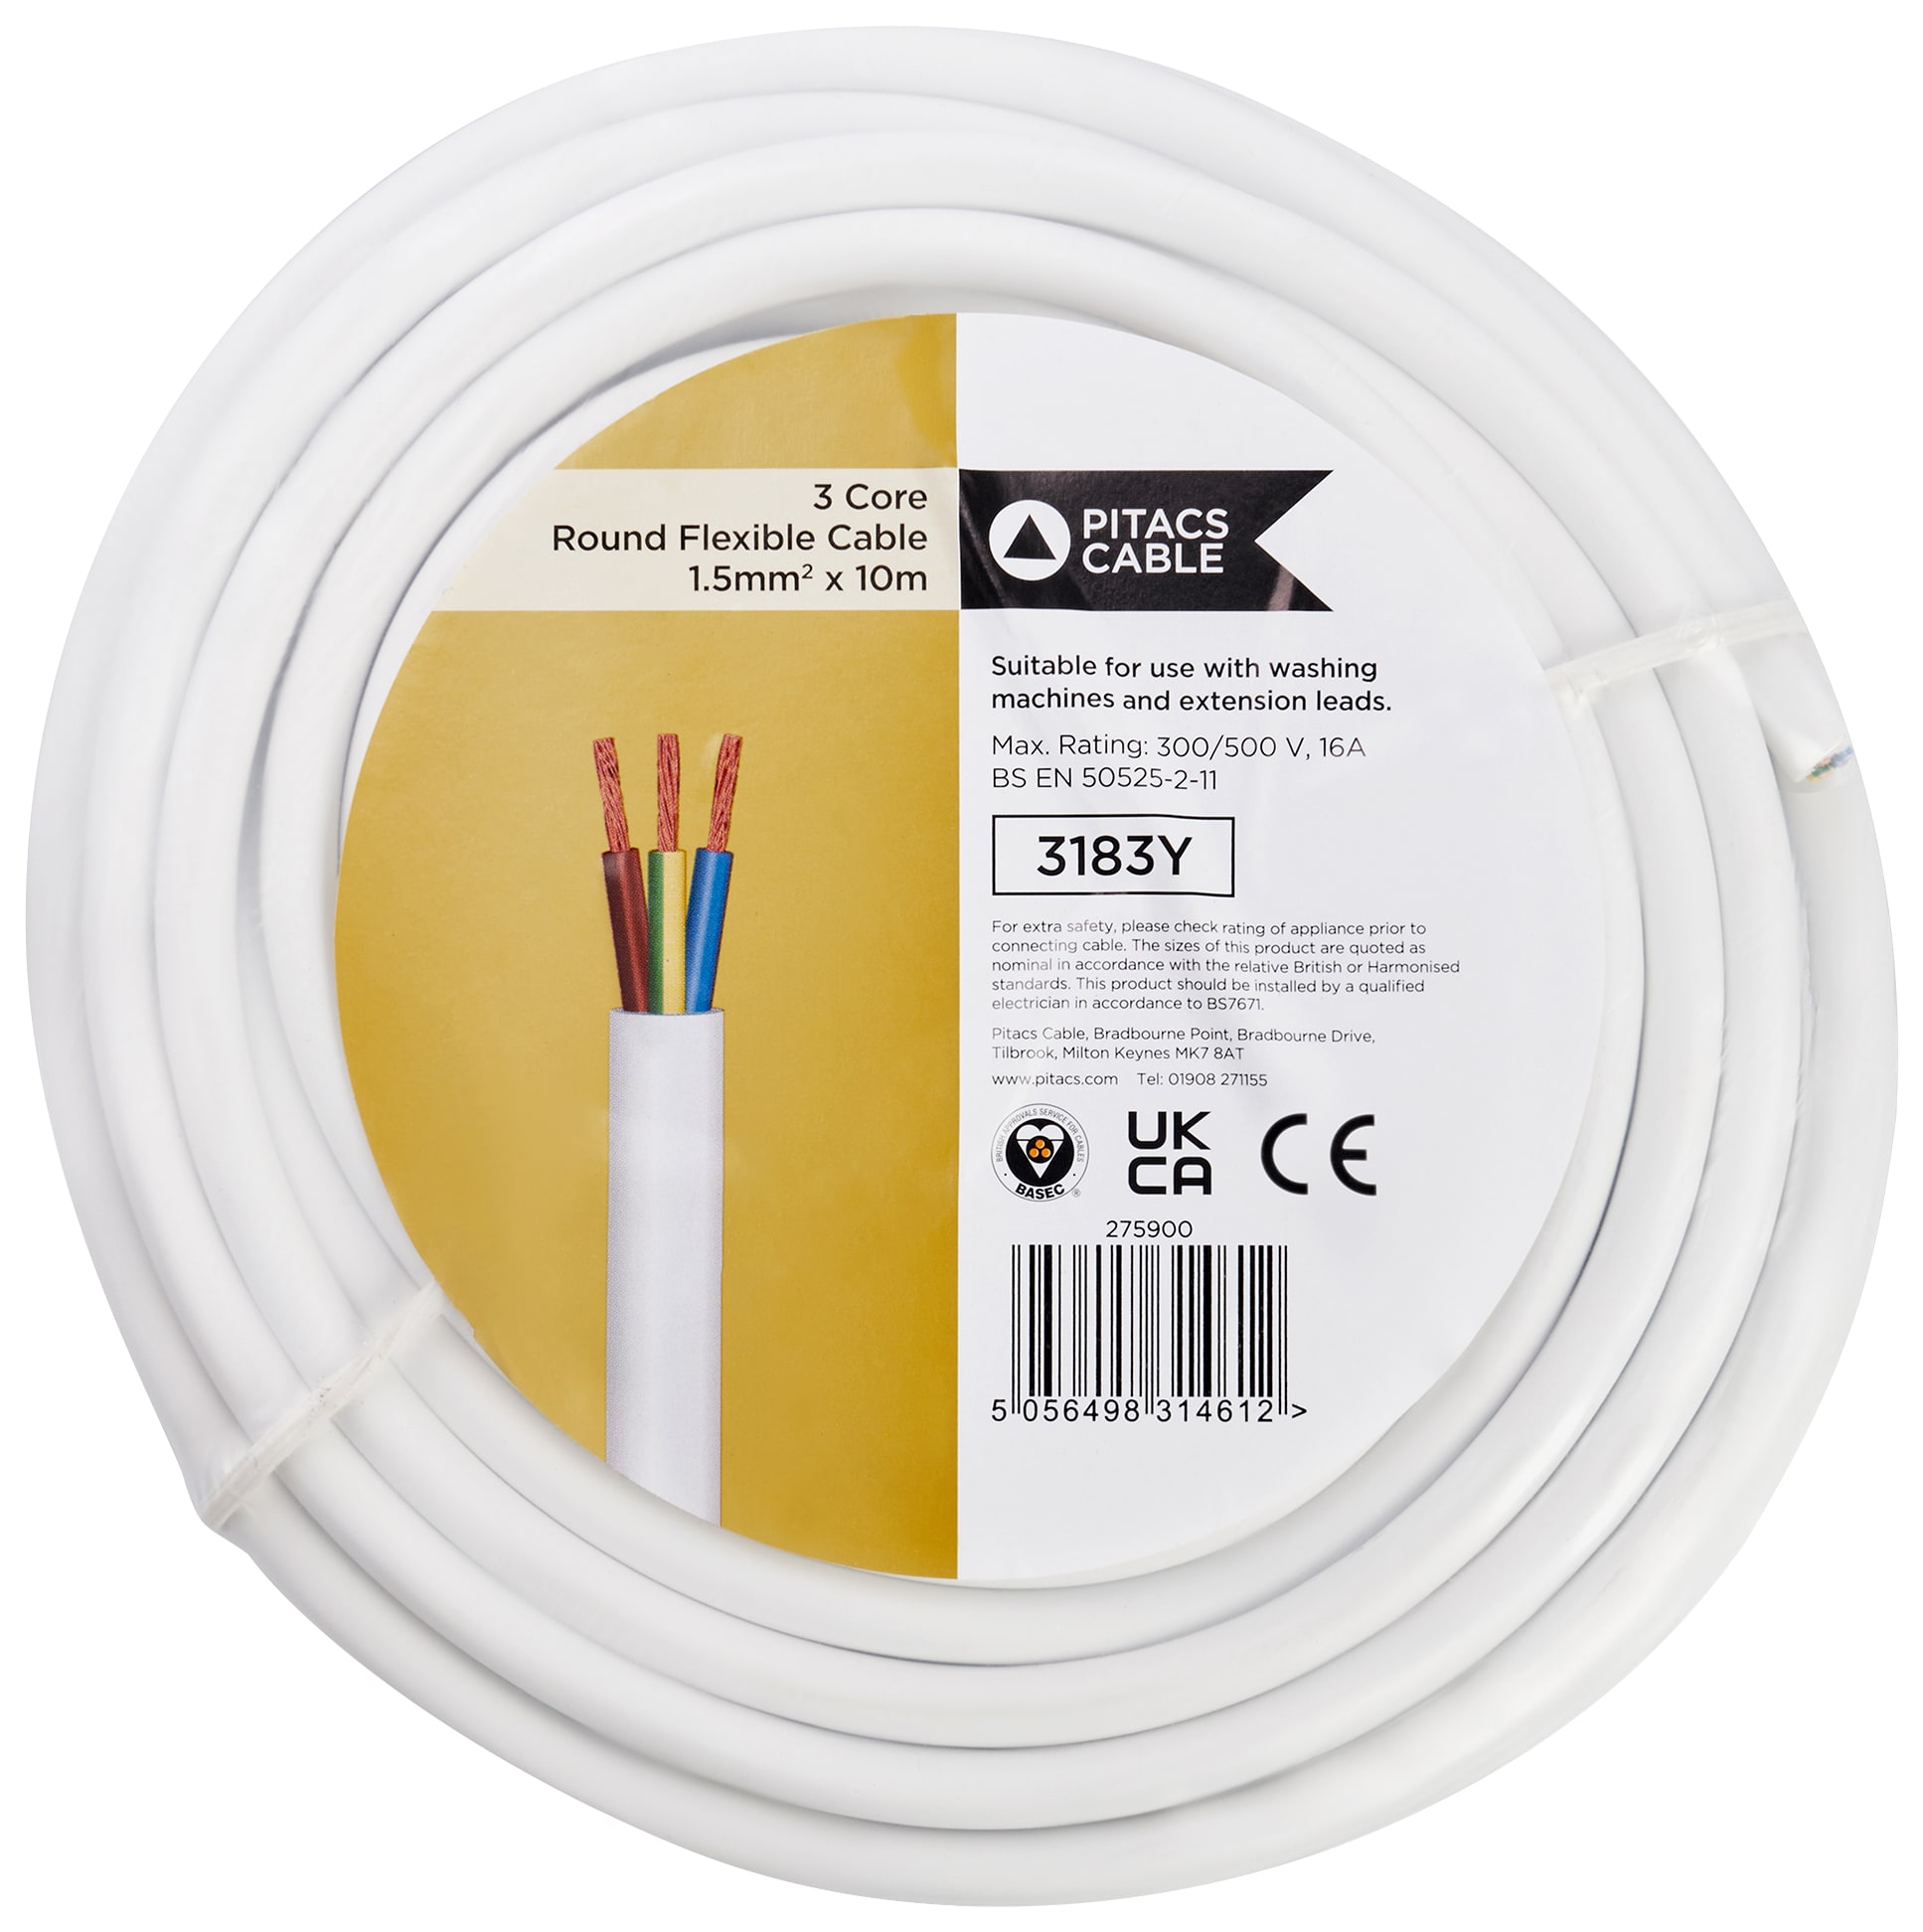 3 Core 3183Y White Round Flexible Cable -